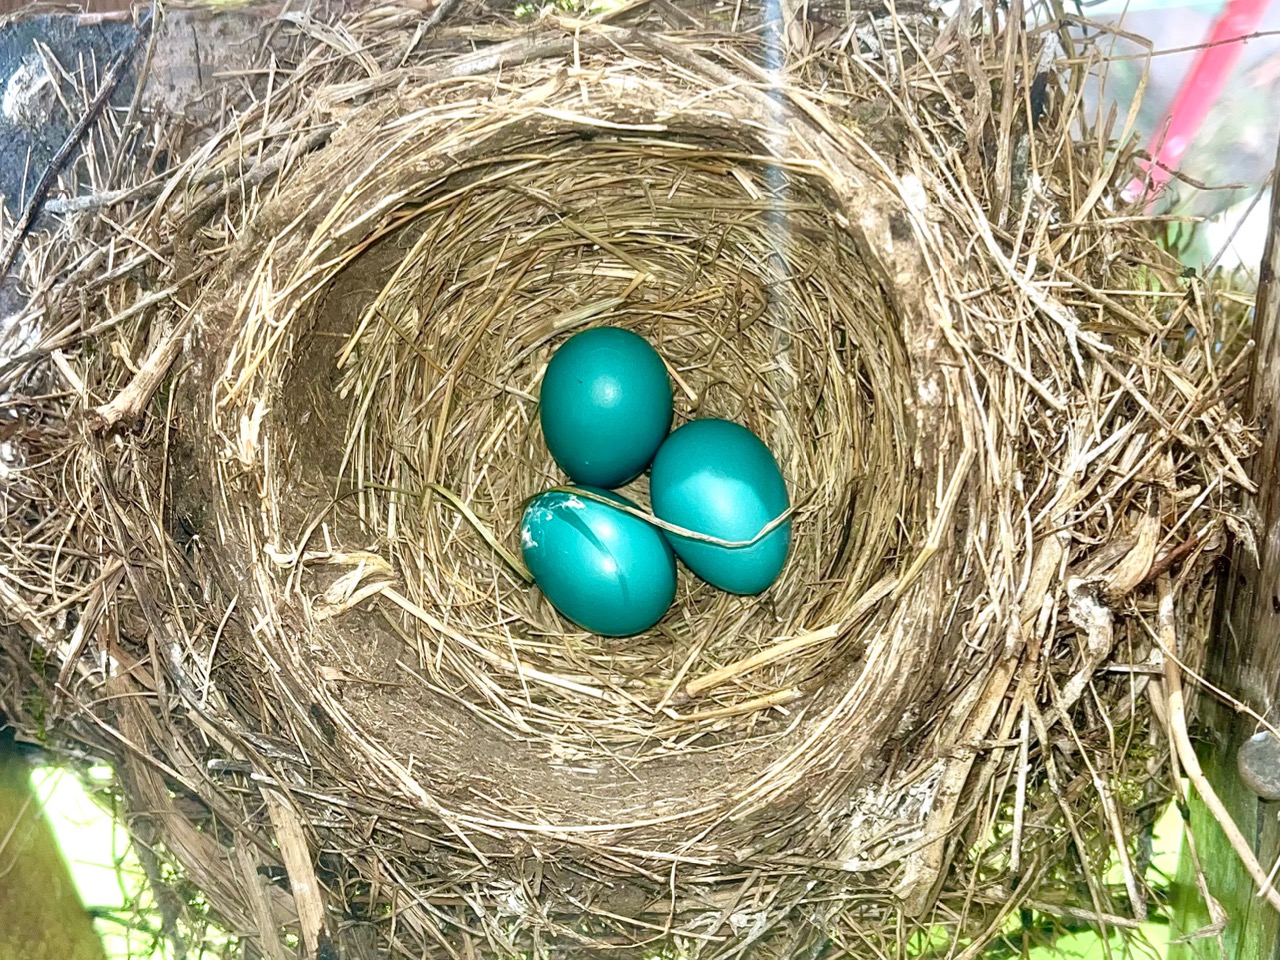 Three blue robin eggs in a brown nest, viewed from above